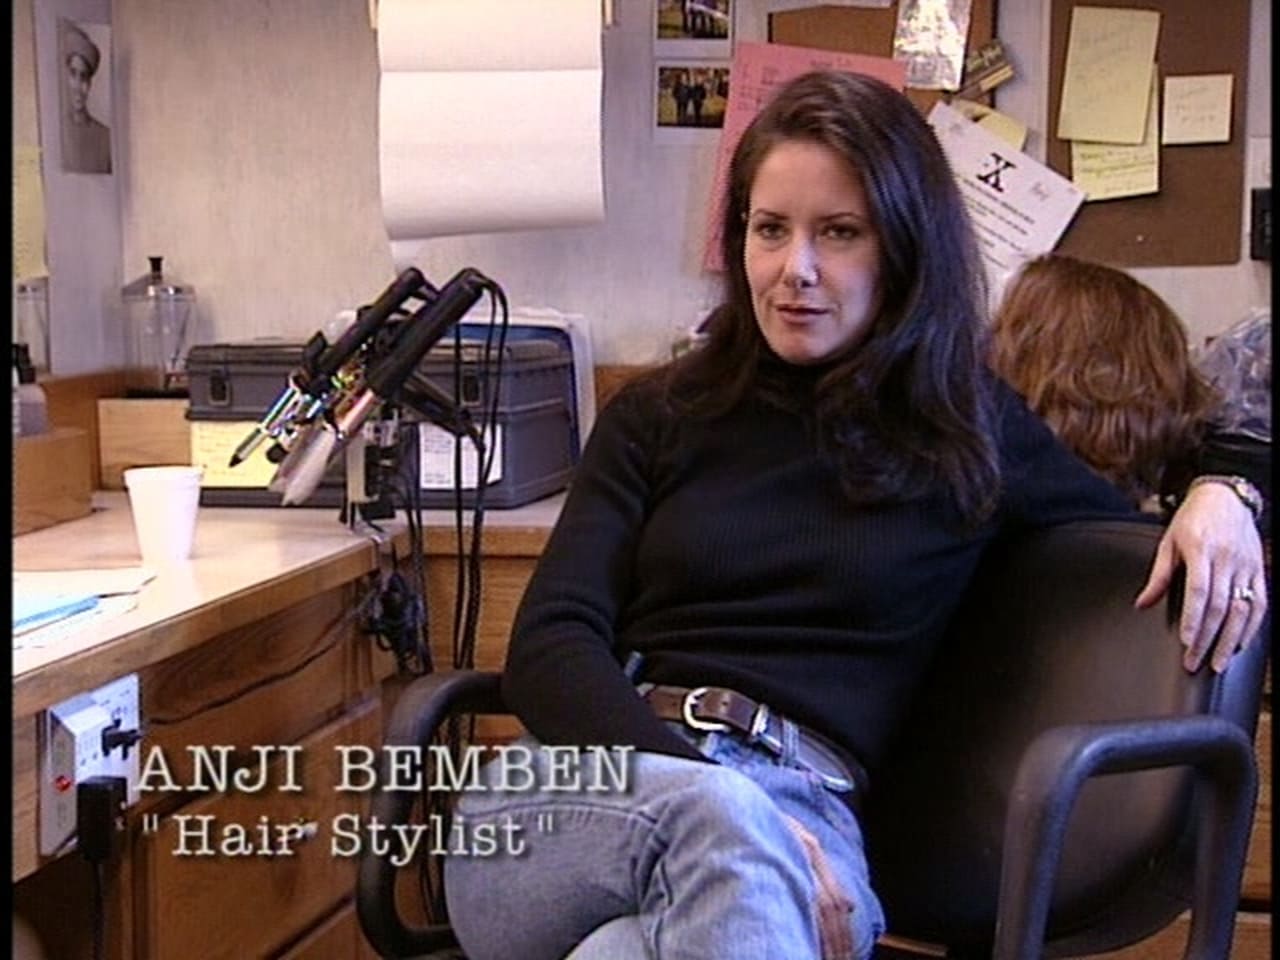 The X-Files - Season 0 Episode 38 : Behind the truth - Hair